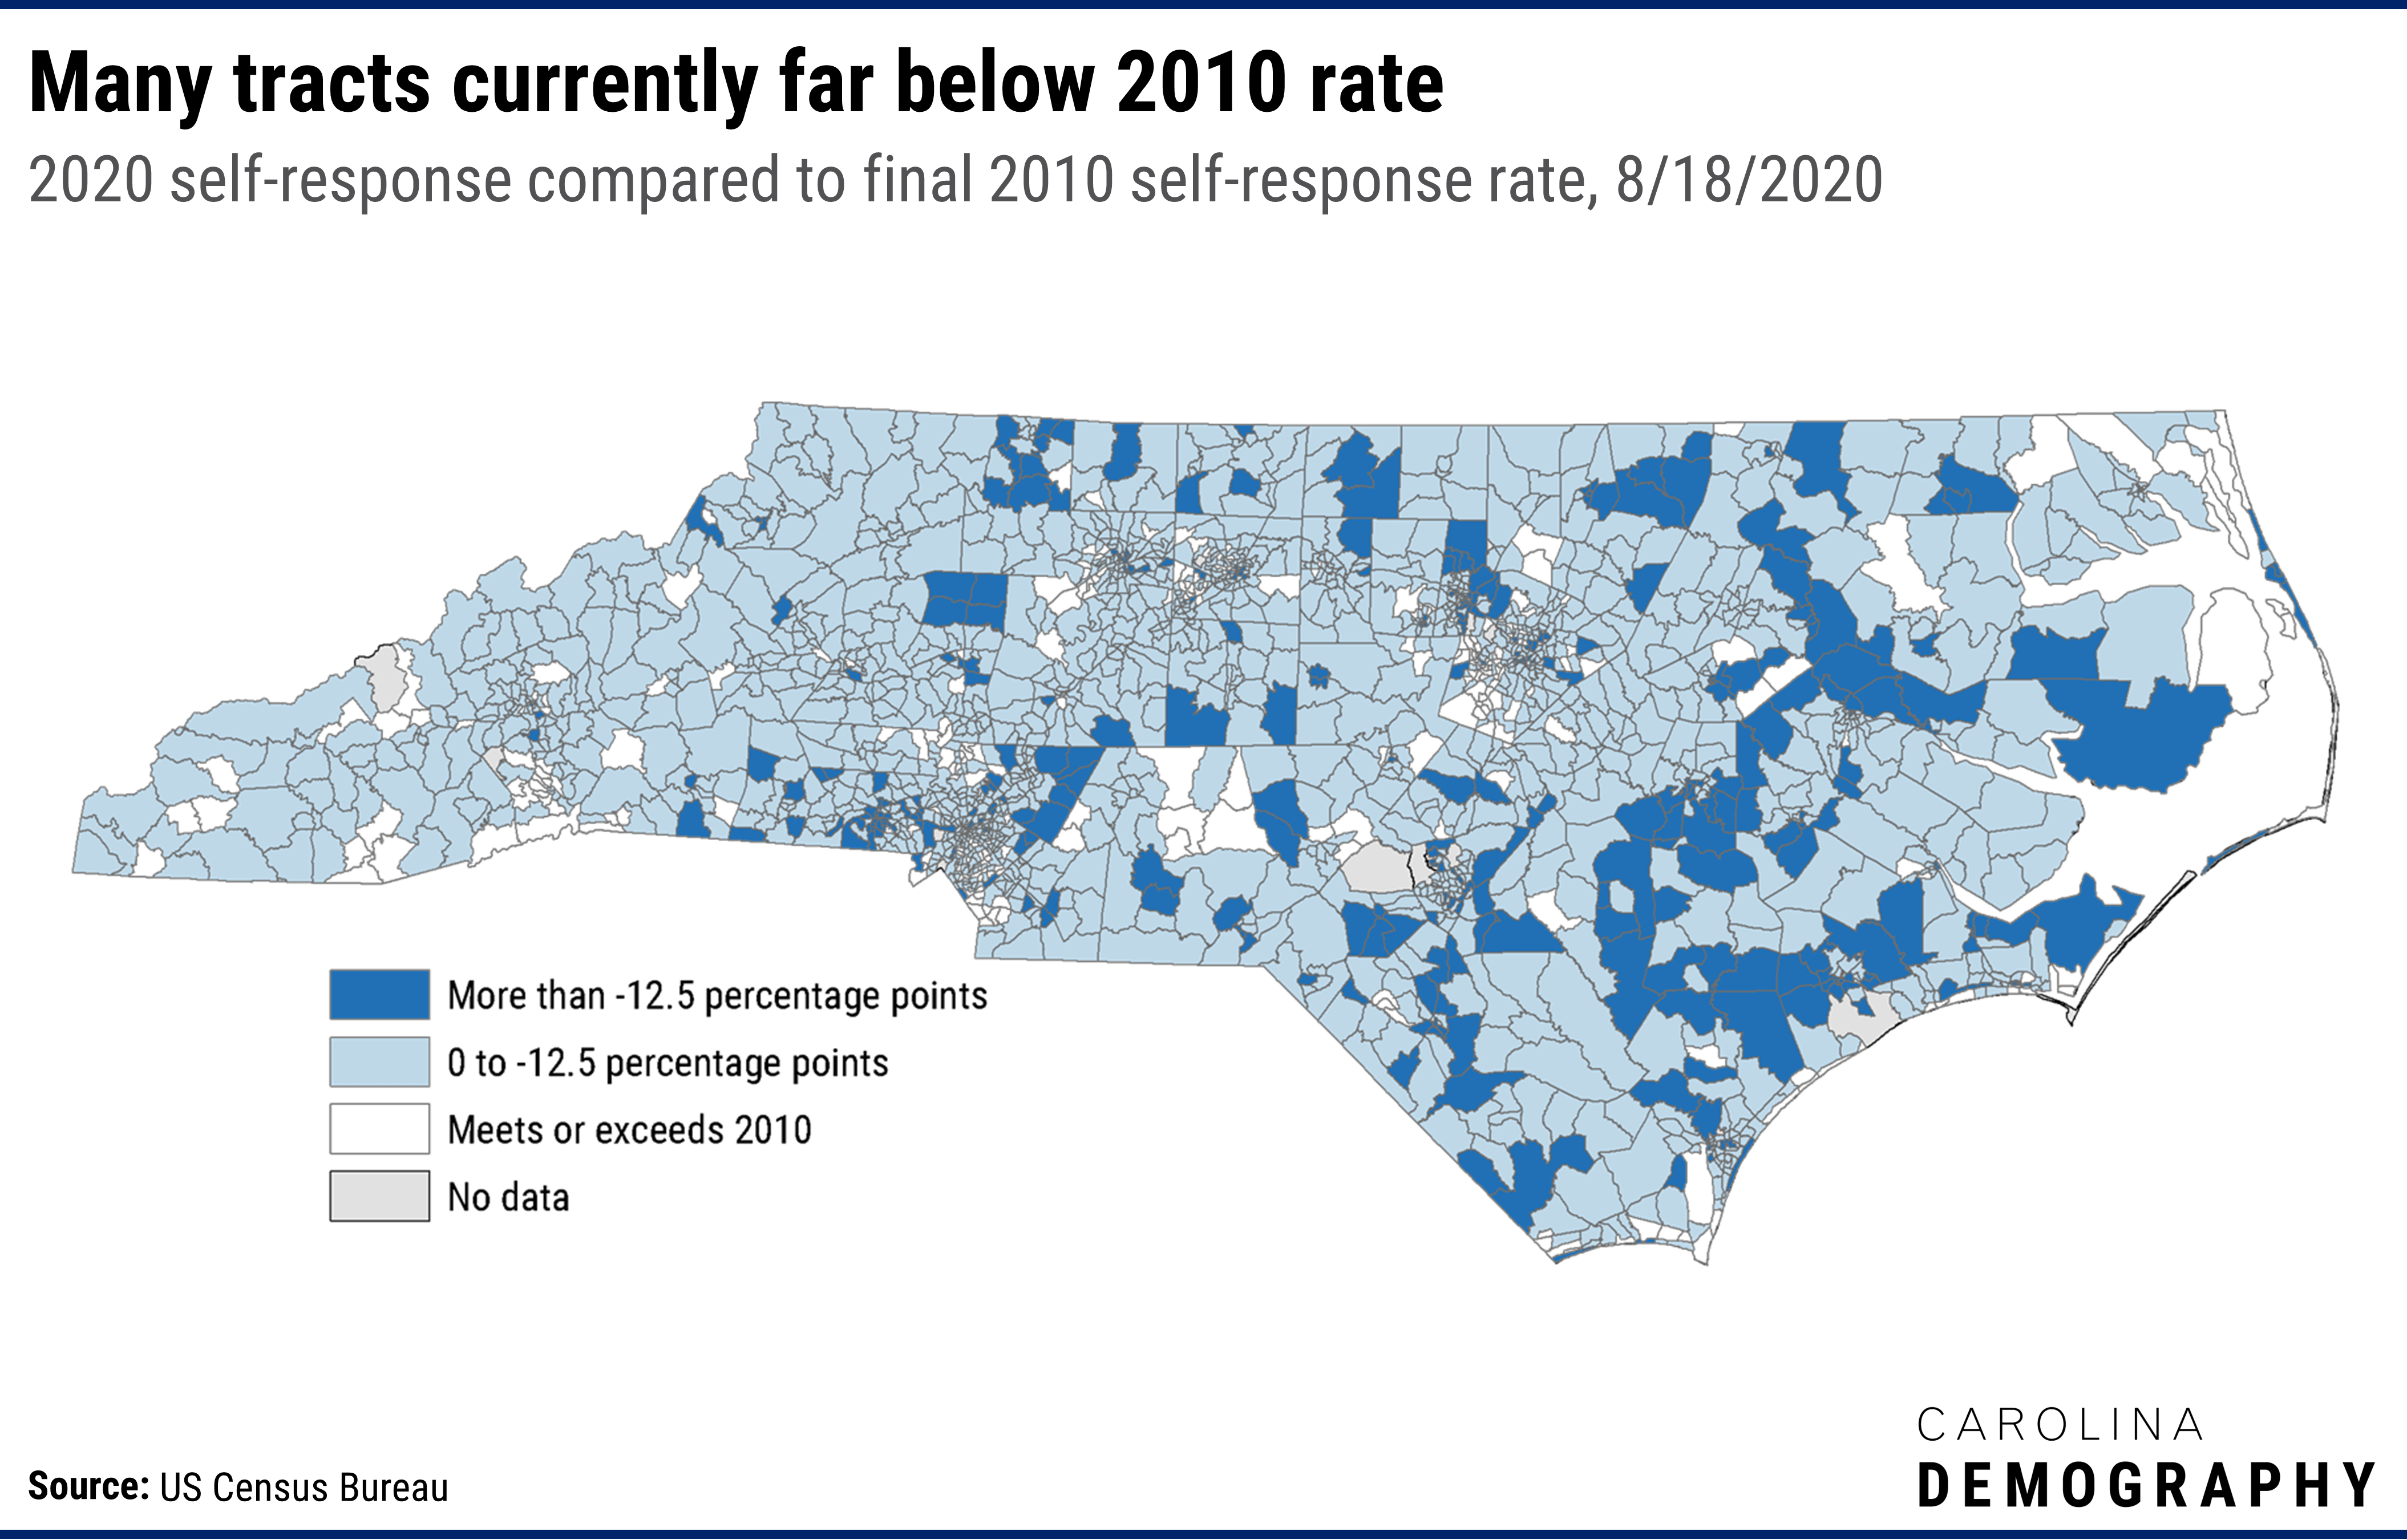 The tracts that are furthest behind where they were in 2010—represented by darker blue on the map—represent key opportunities to try to increase self-response rates by September 30th to ensure a complete and accurate count. The highest concentration of these tracts is in eastern North Carolina east of I-95. In six counties, over half of all census tracts fall into this high-risk category: Hyde (100%), Warren (67%), Hertford (60%), Greene (50%), Hoke (50%), and Vance (50%). There are also significant concentrations of these high-risk tracts in urban areas, with visible clusters around Charlotte, the Triad, the Triangle, and our military communities. The largest number of high-risk tracts are in Gaston County (29), followed by Durham (19), Mecklenburg (18) and Wake (18), Cumberland (17), Forsyth (14) and Onslow (14) counties.